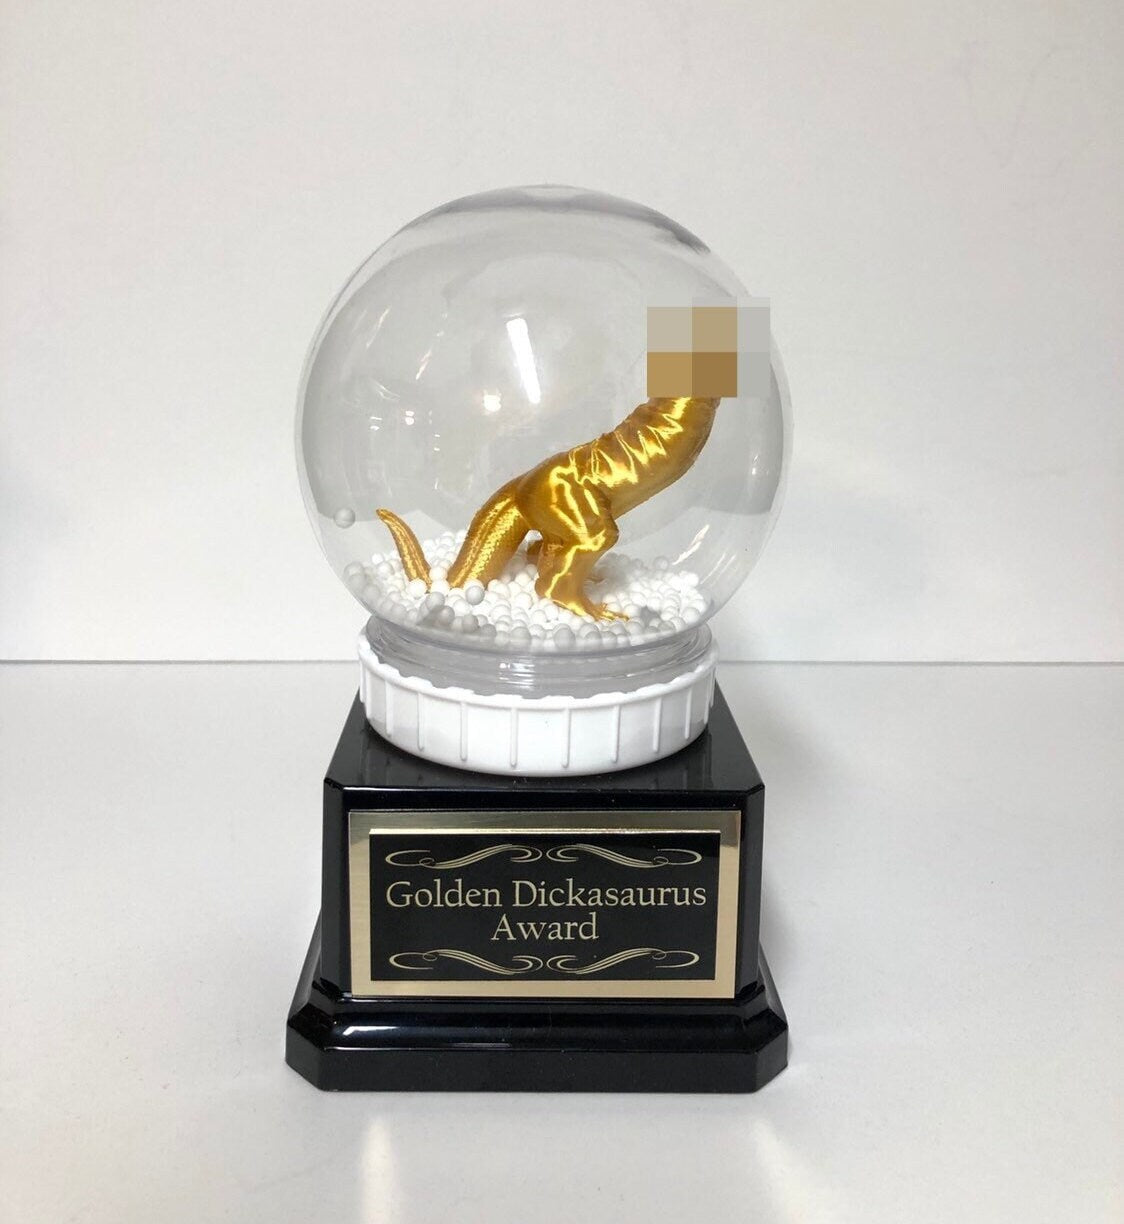 Dickasaurus Funny Trophy Snow Globe Adult Humor Award You're A Dick Christmas Gag Gift LOSER Trophy FFL Last Place Fantasy Penis Funny